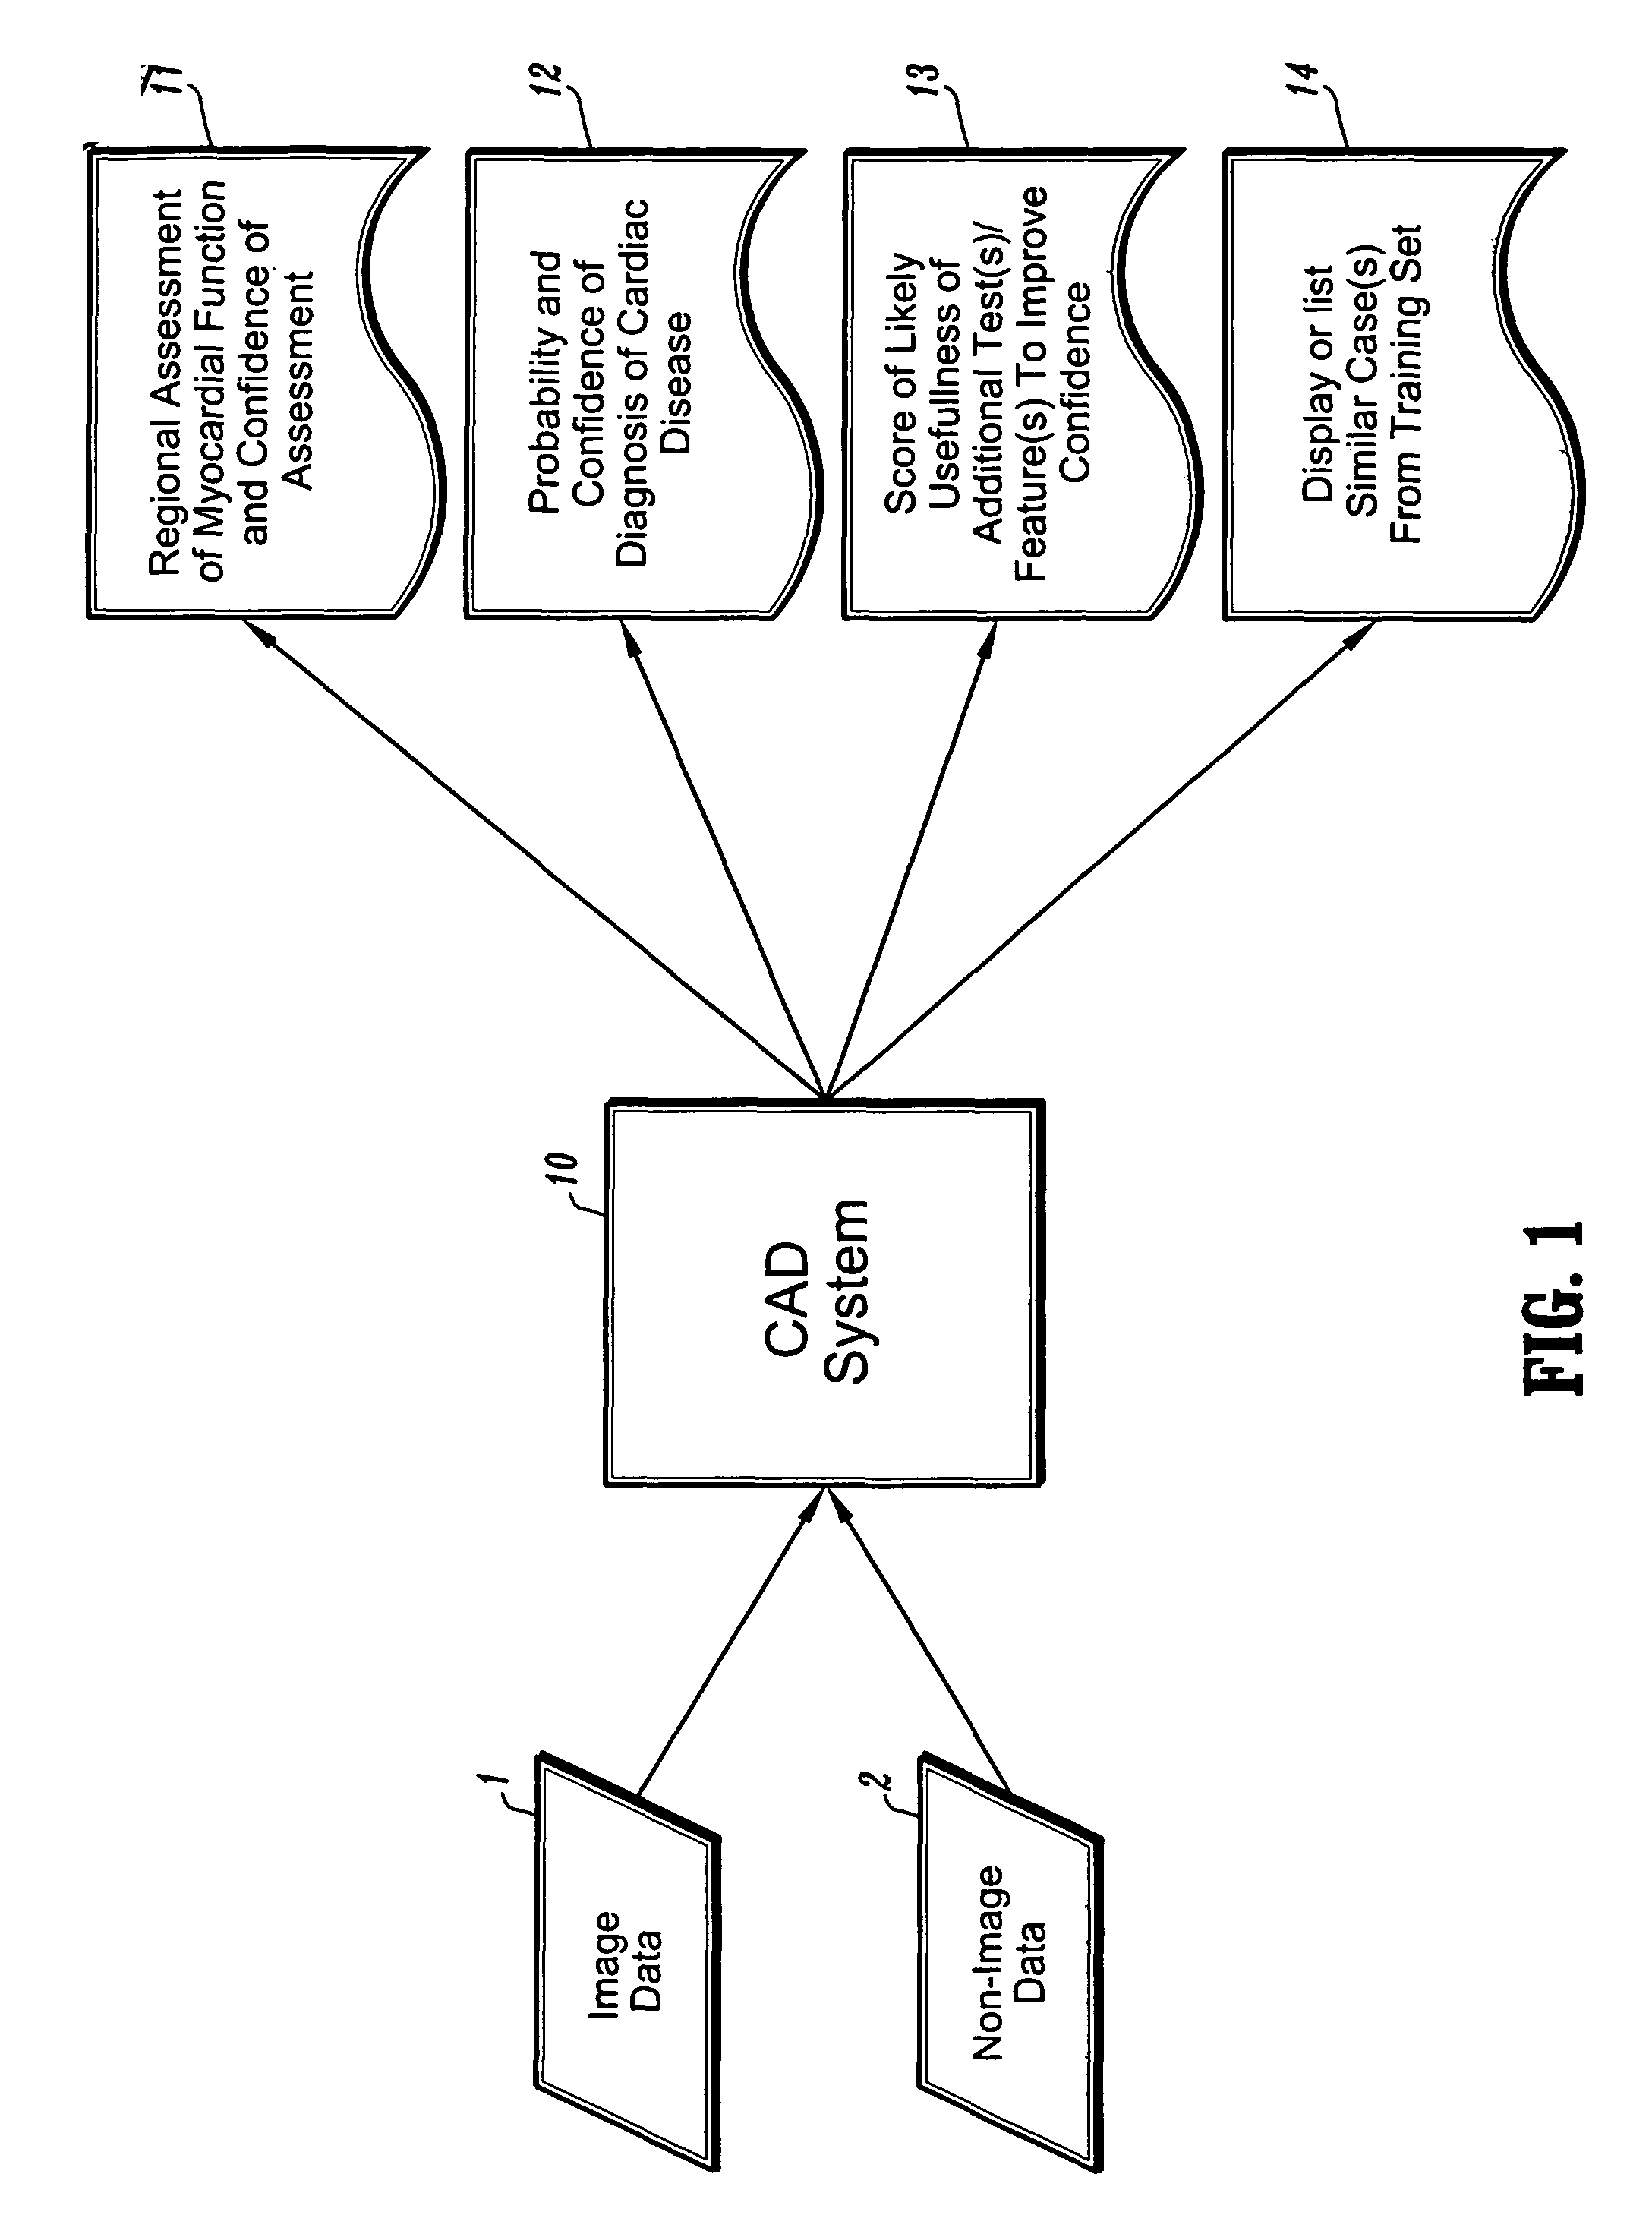 Systems and methods for automated diagnosis and decision support for heart related diseases and conditions